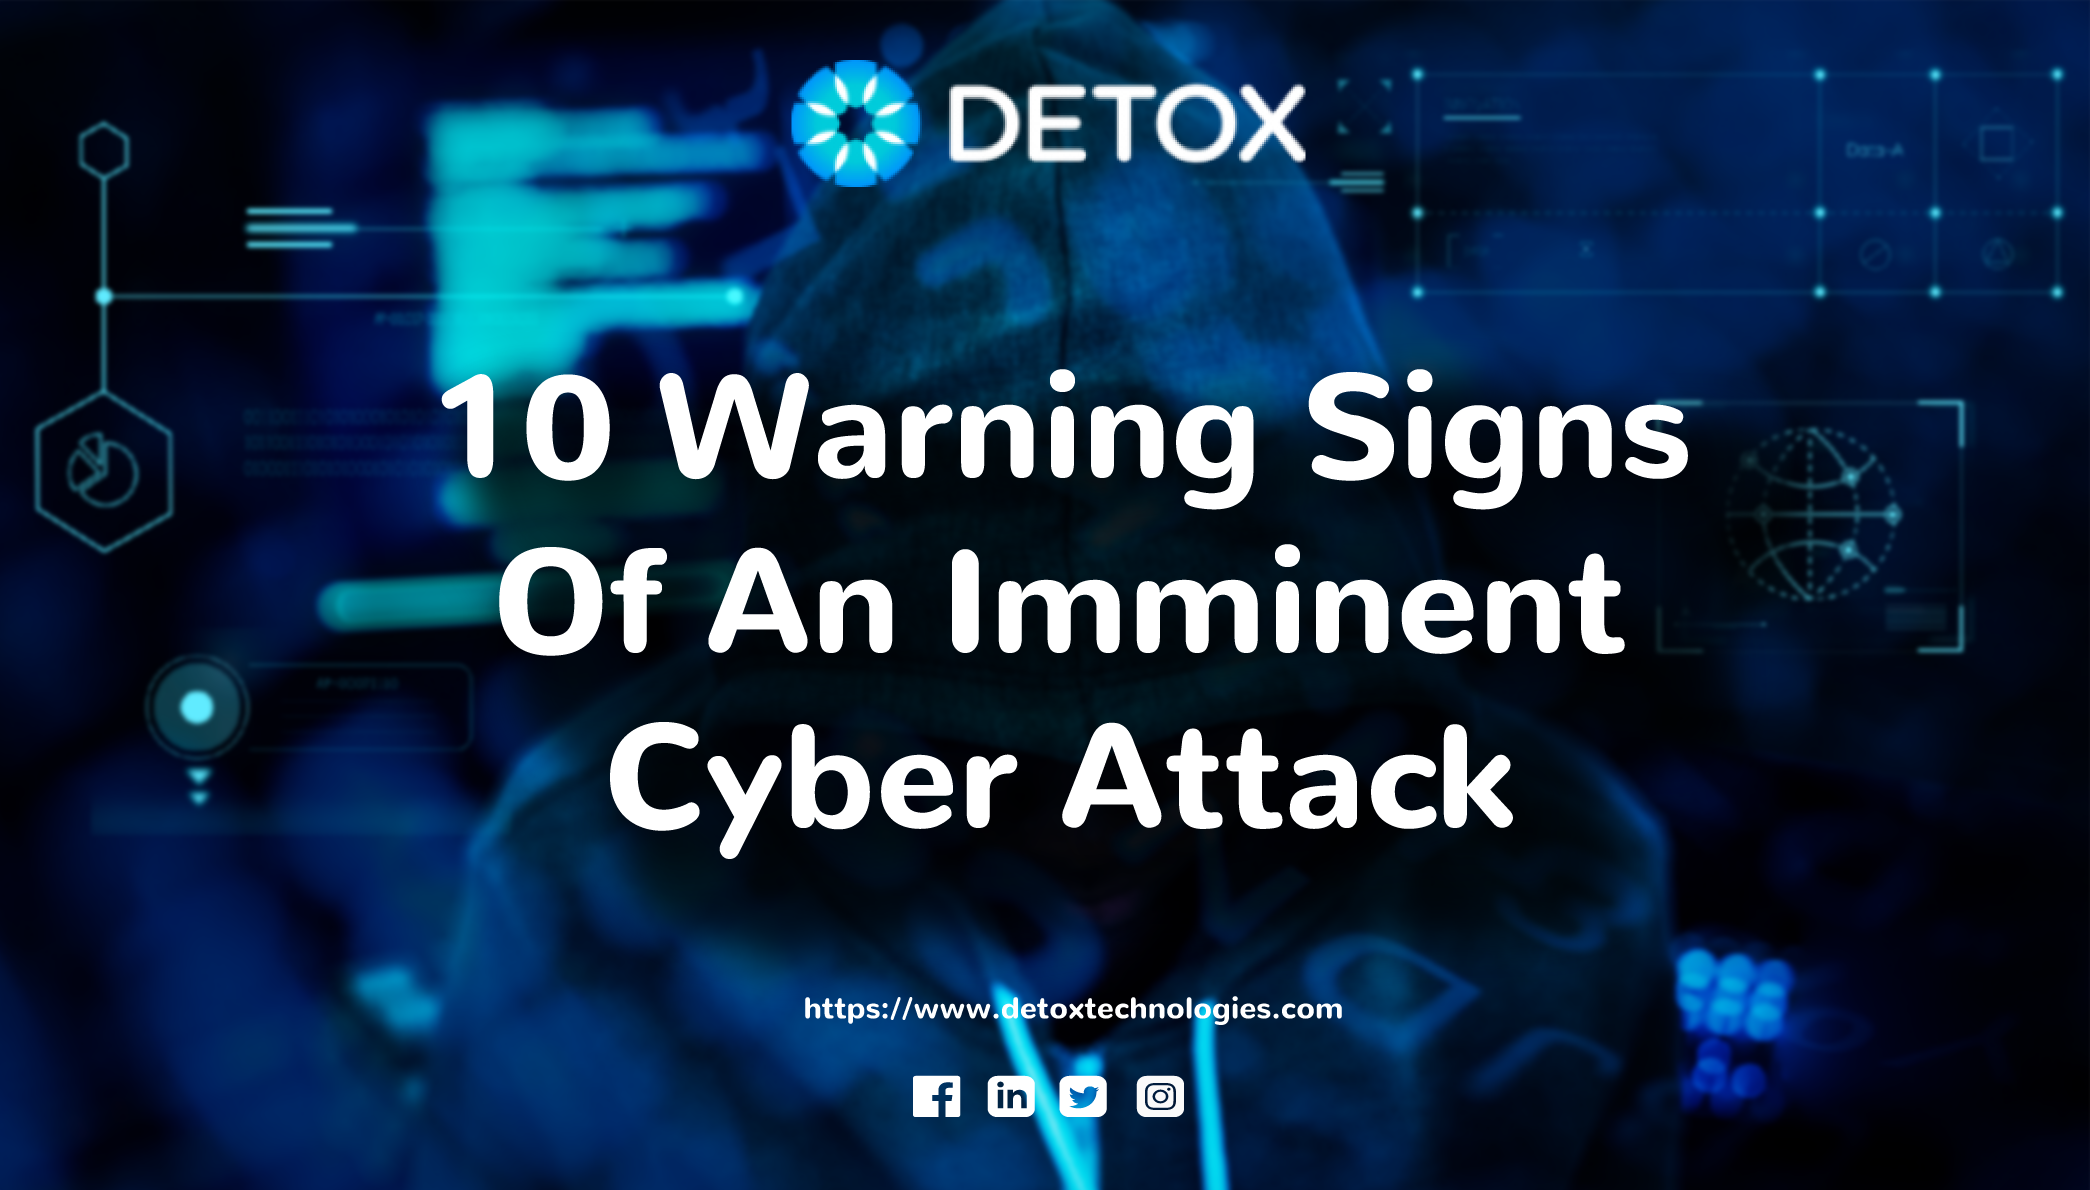 10 Warning Signs Of An Imminent Cyber Attack in 2022